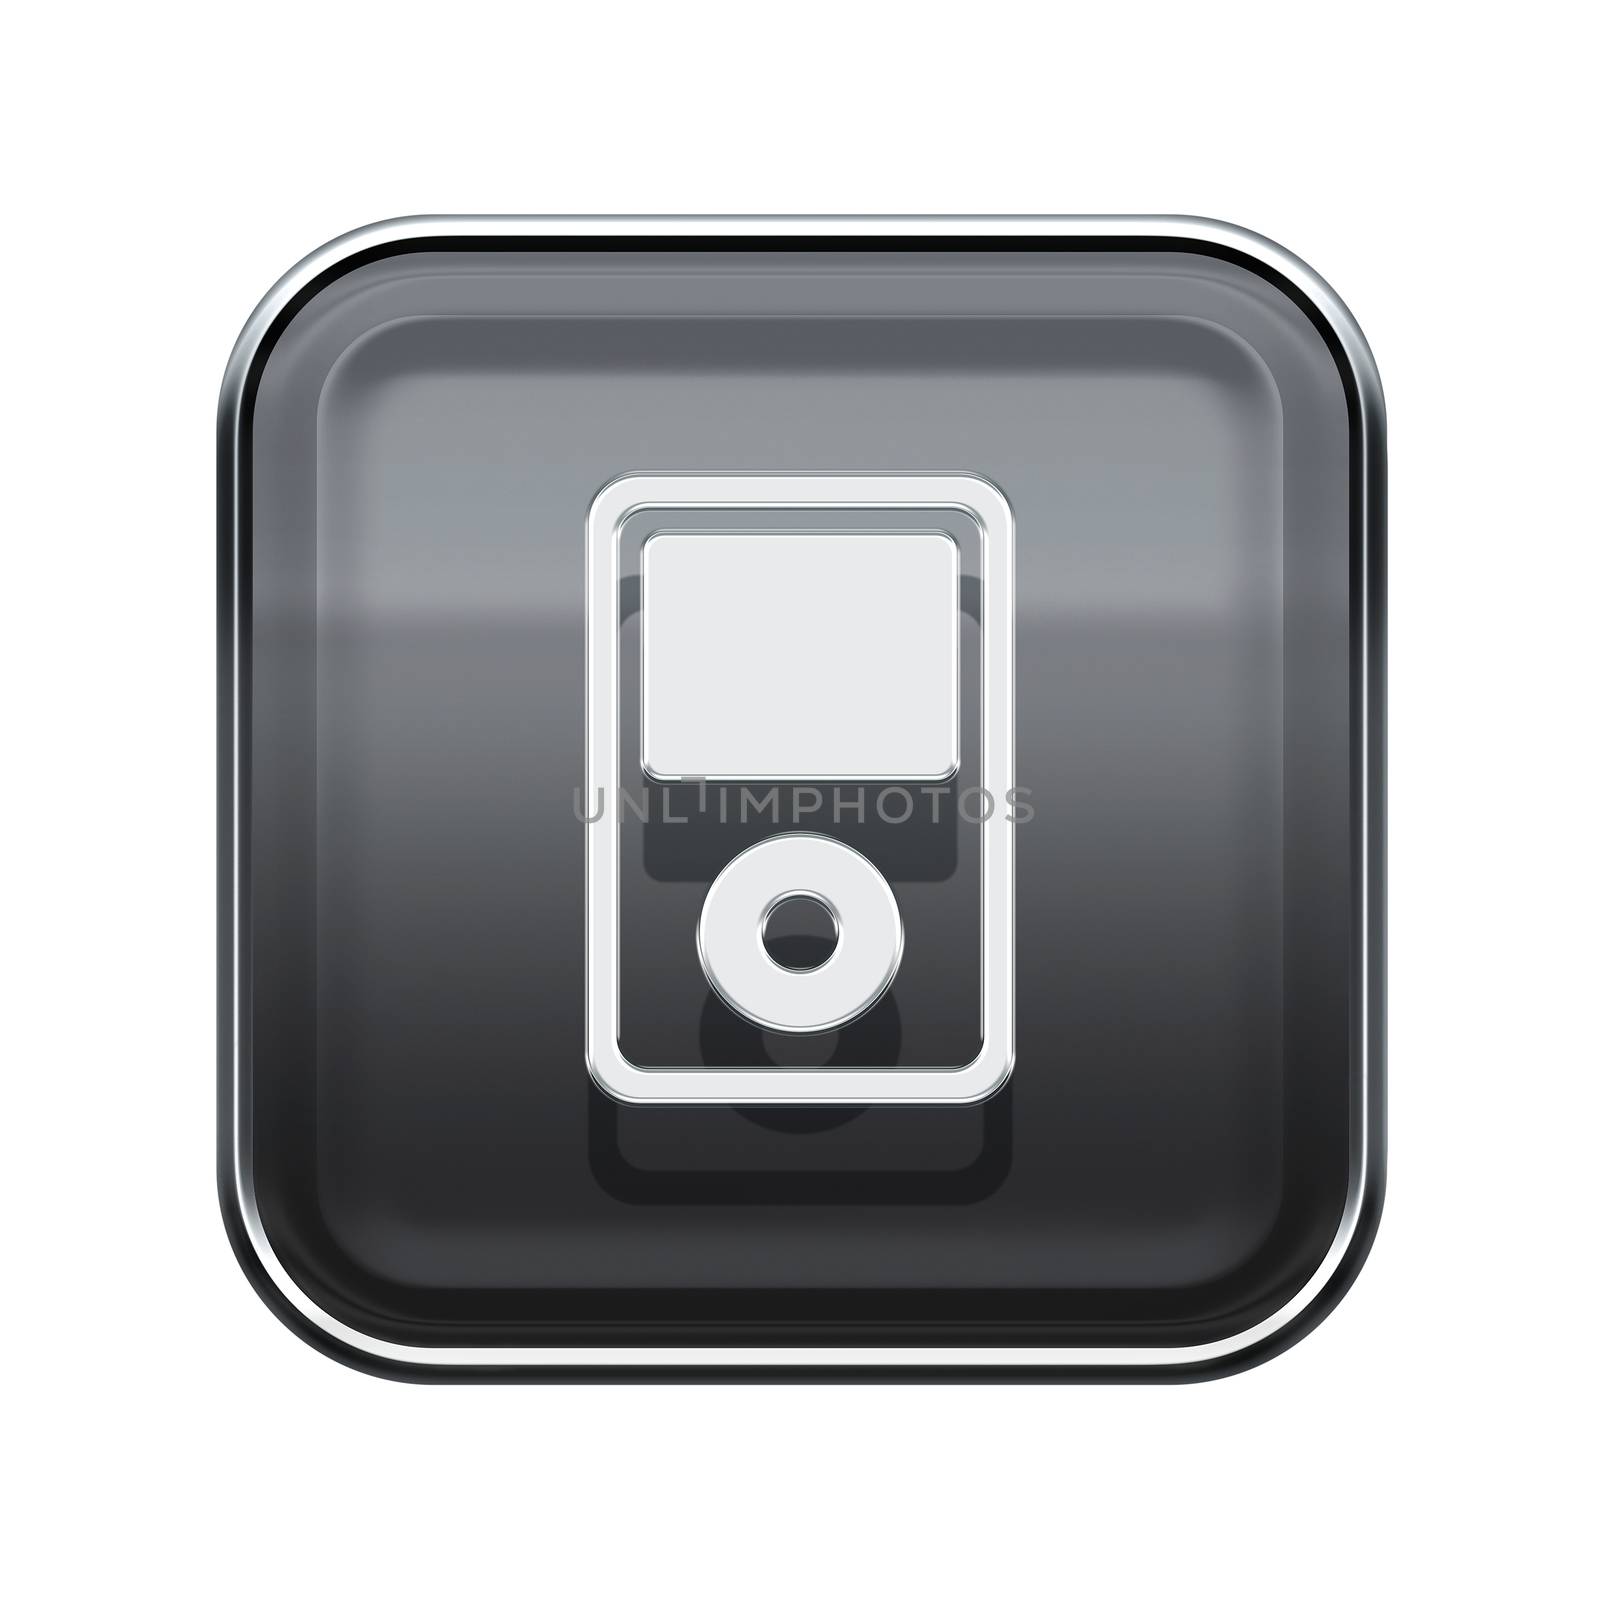 mp3 player glossy grey, isolated on white background by zeffss